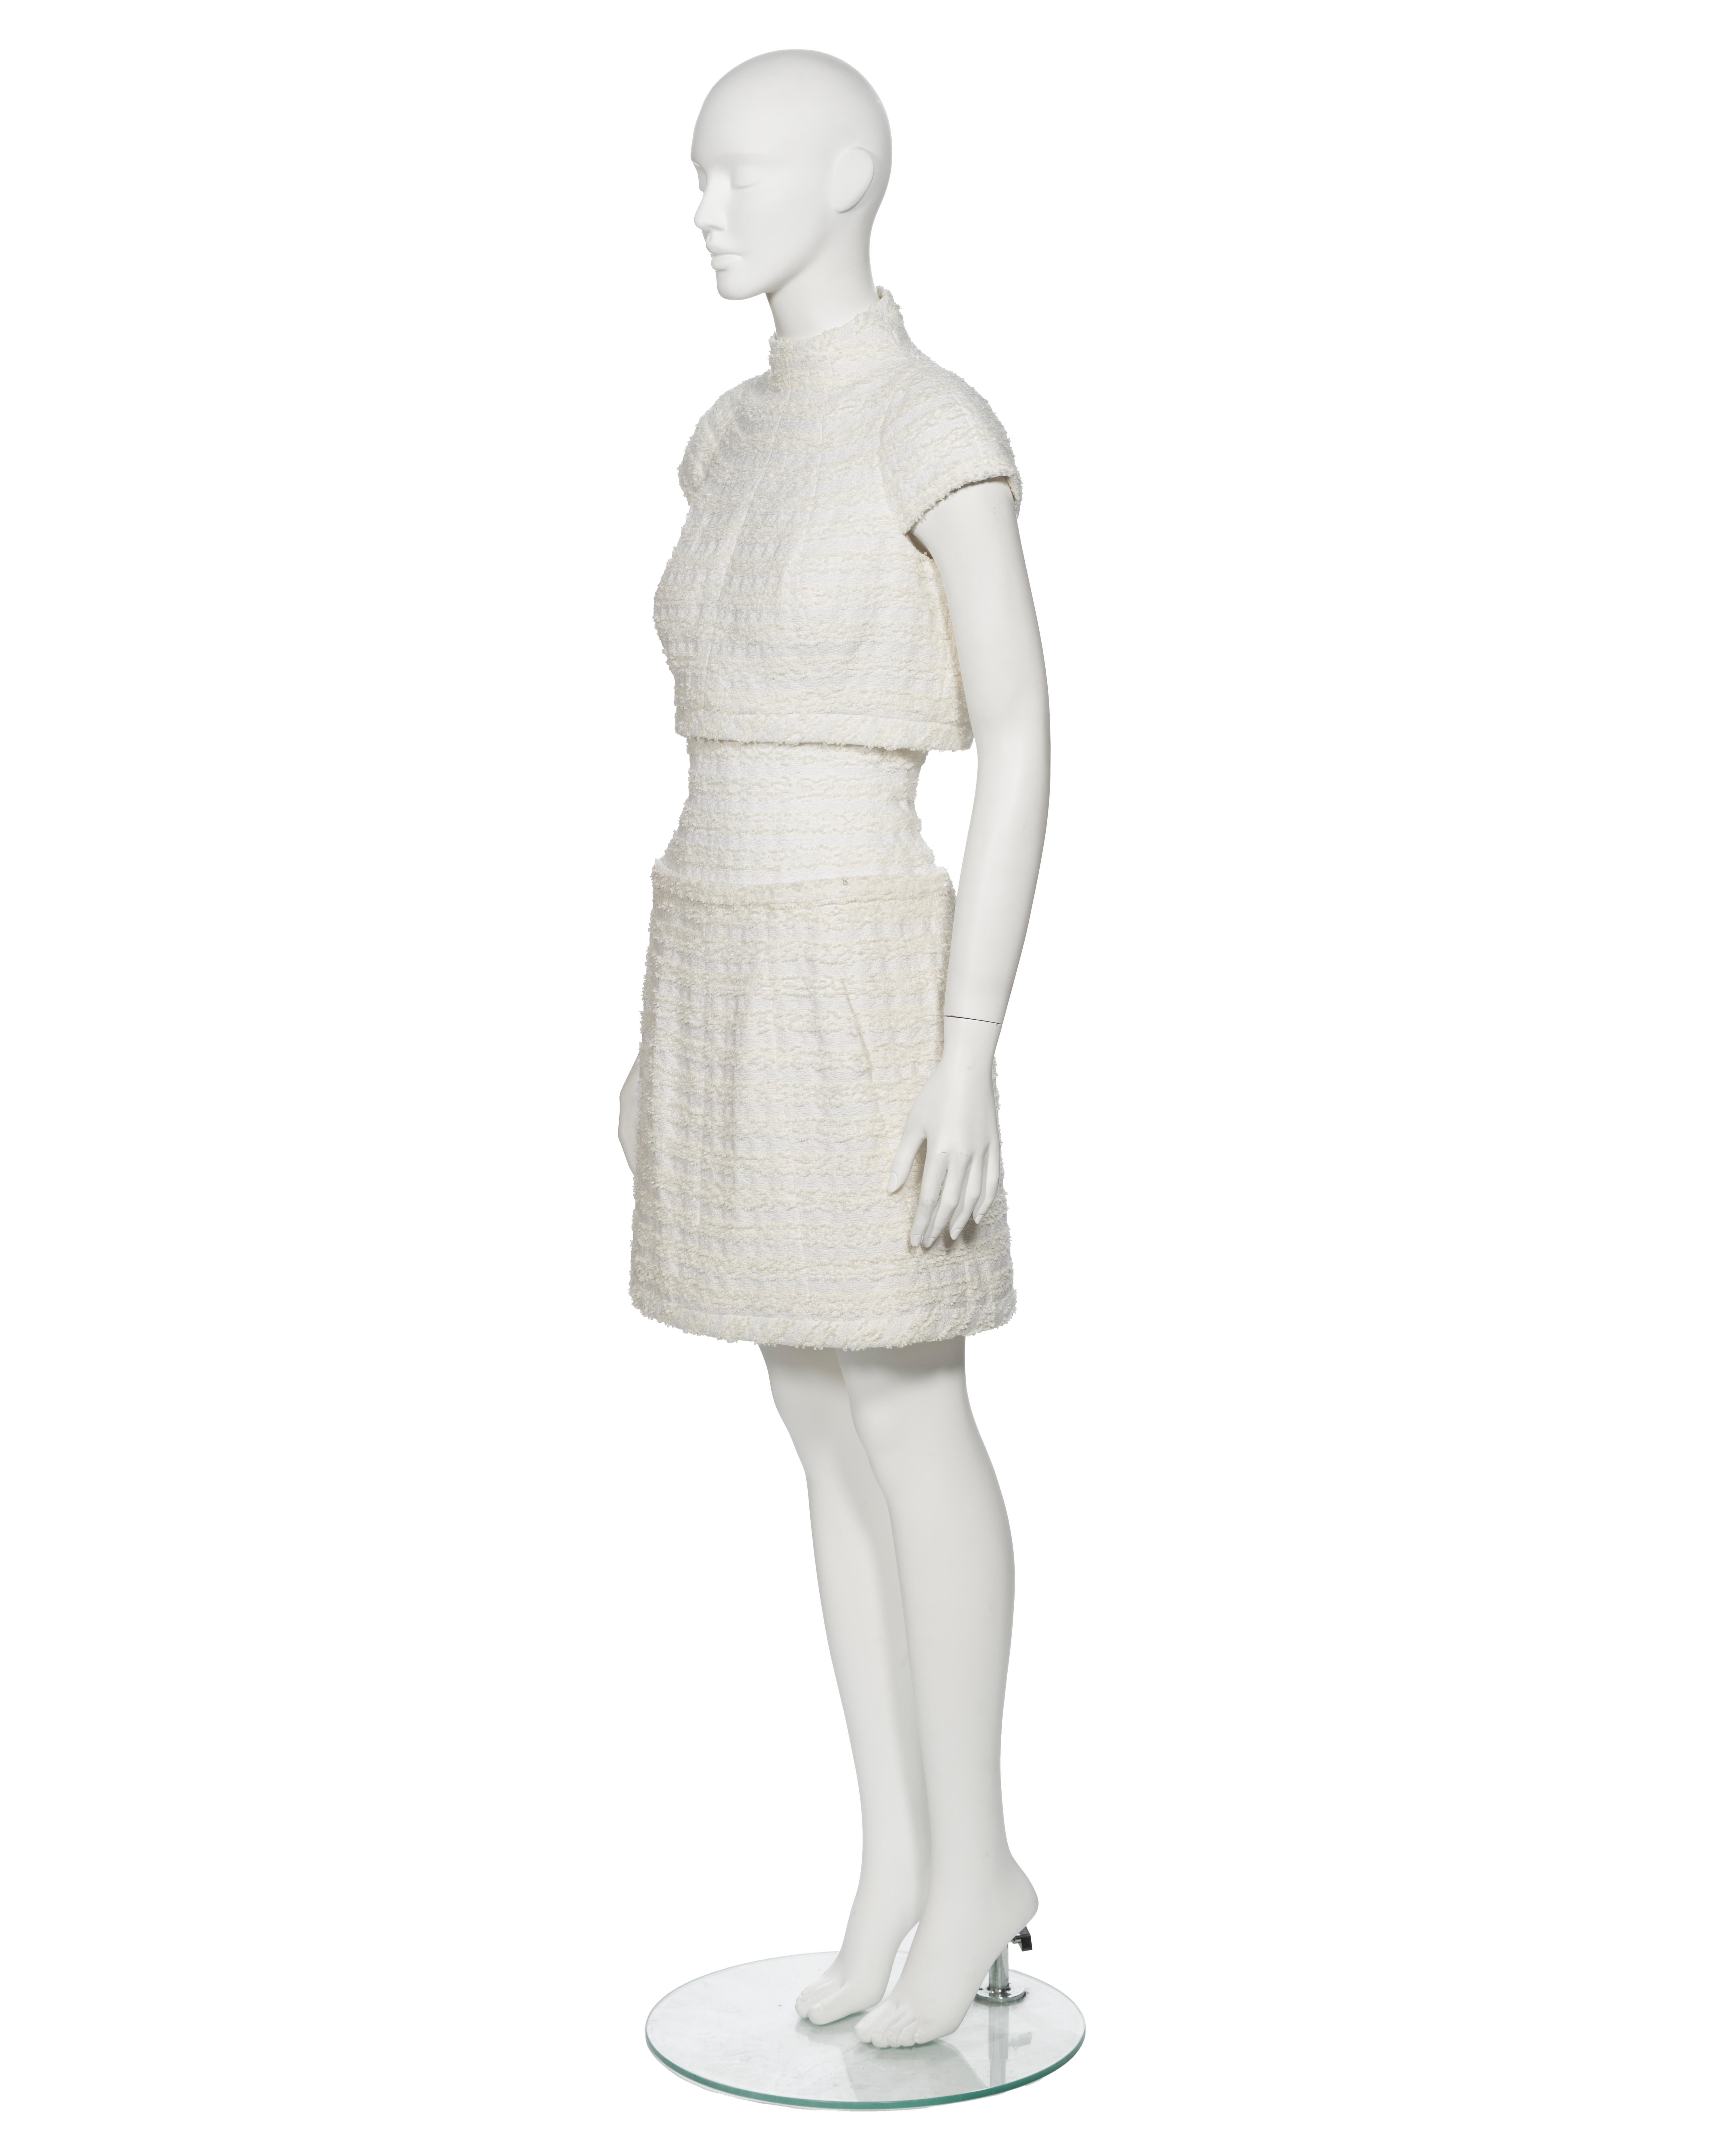 Chanel by Karl Lagerfeld Haute Couture White Bouclé Corseted Skirt Suit, ss 2014 For Sale 10